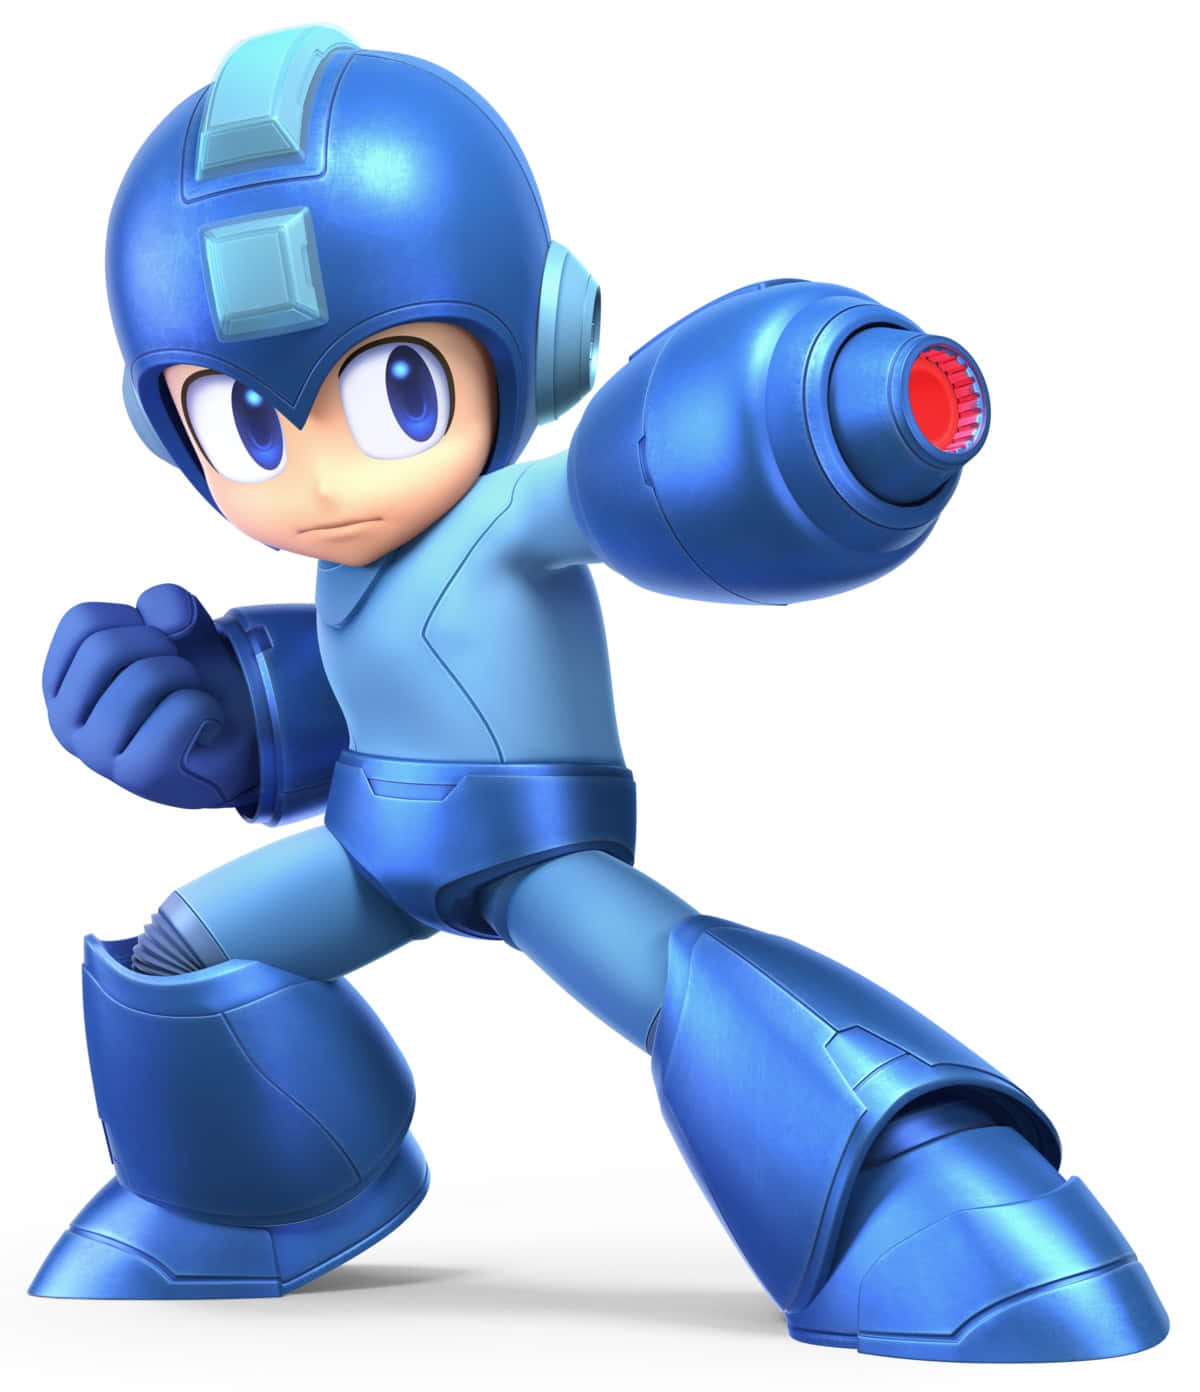 Megaman standing tall and ready for action against a futuristic cityscape